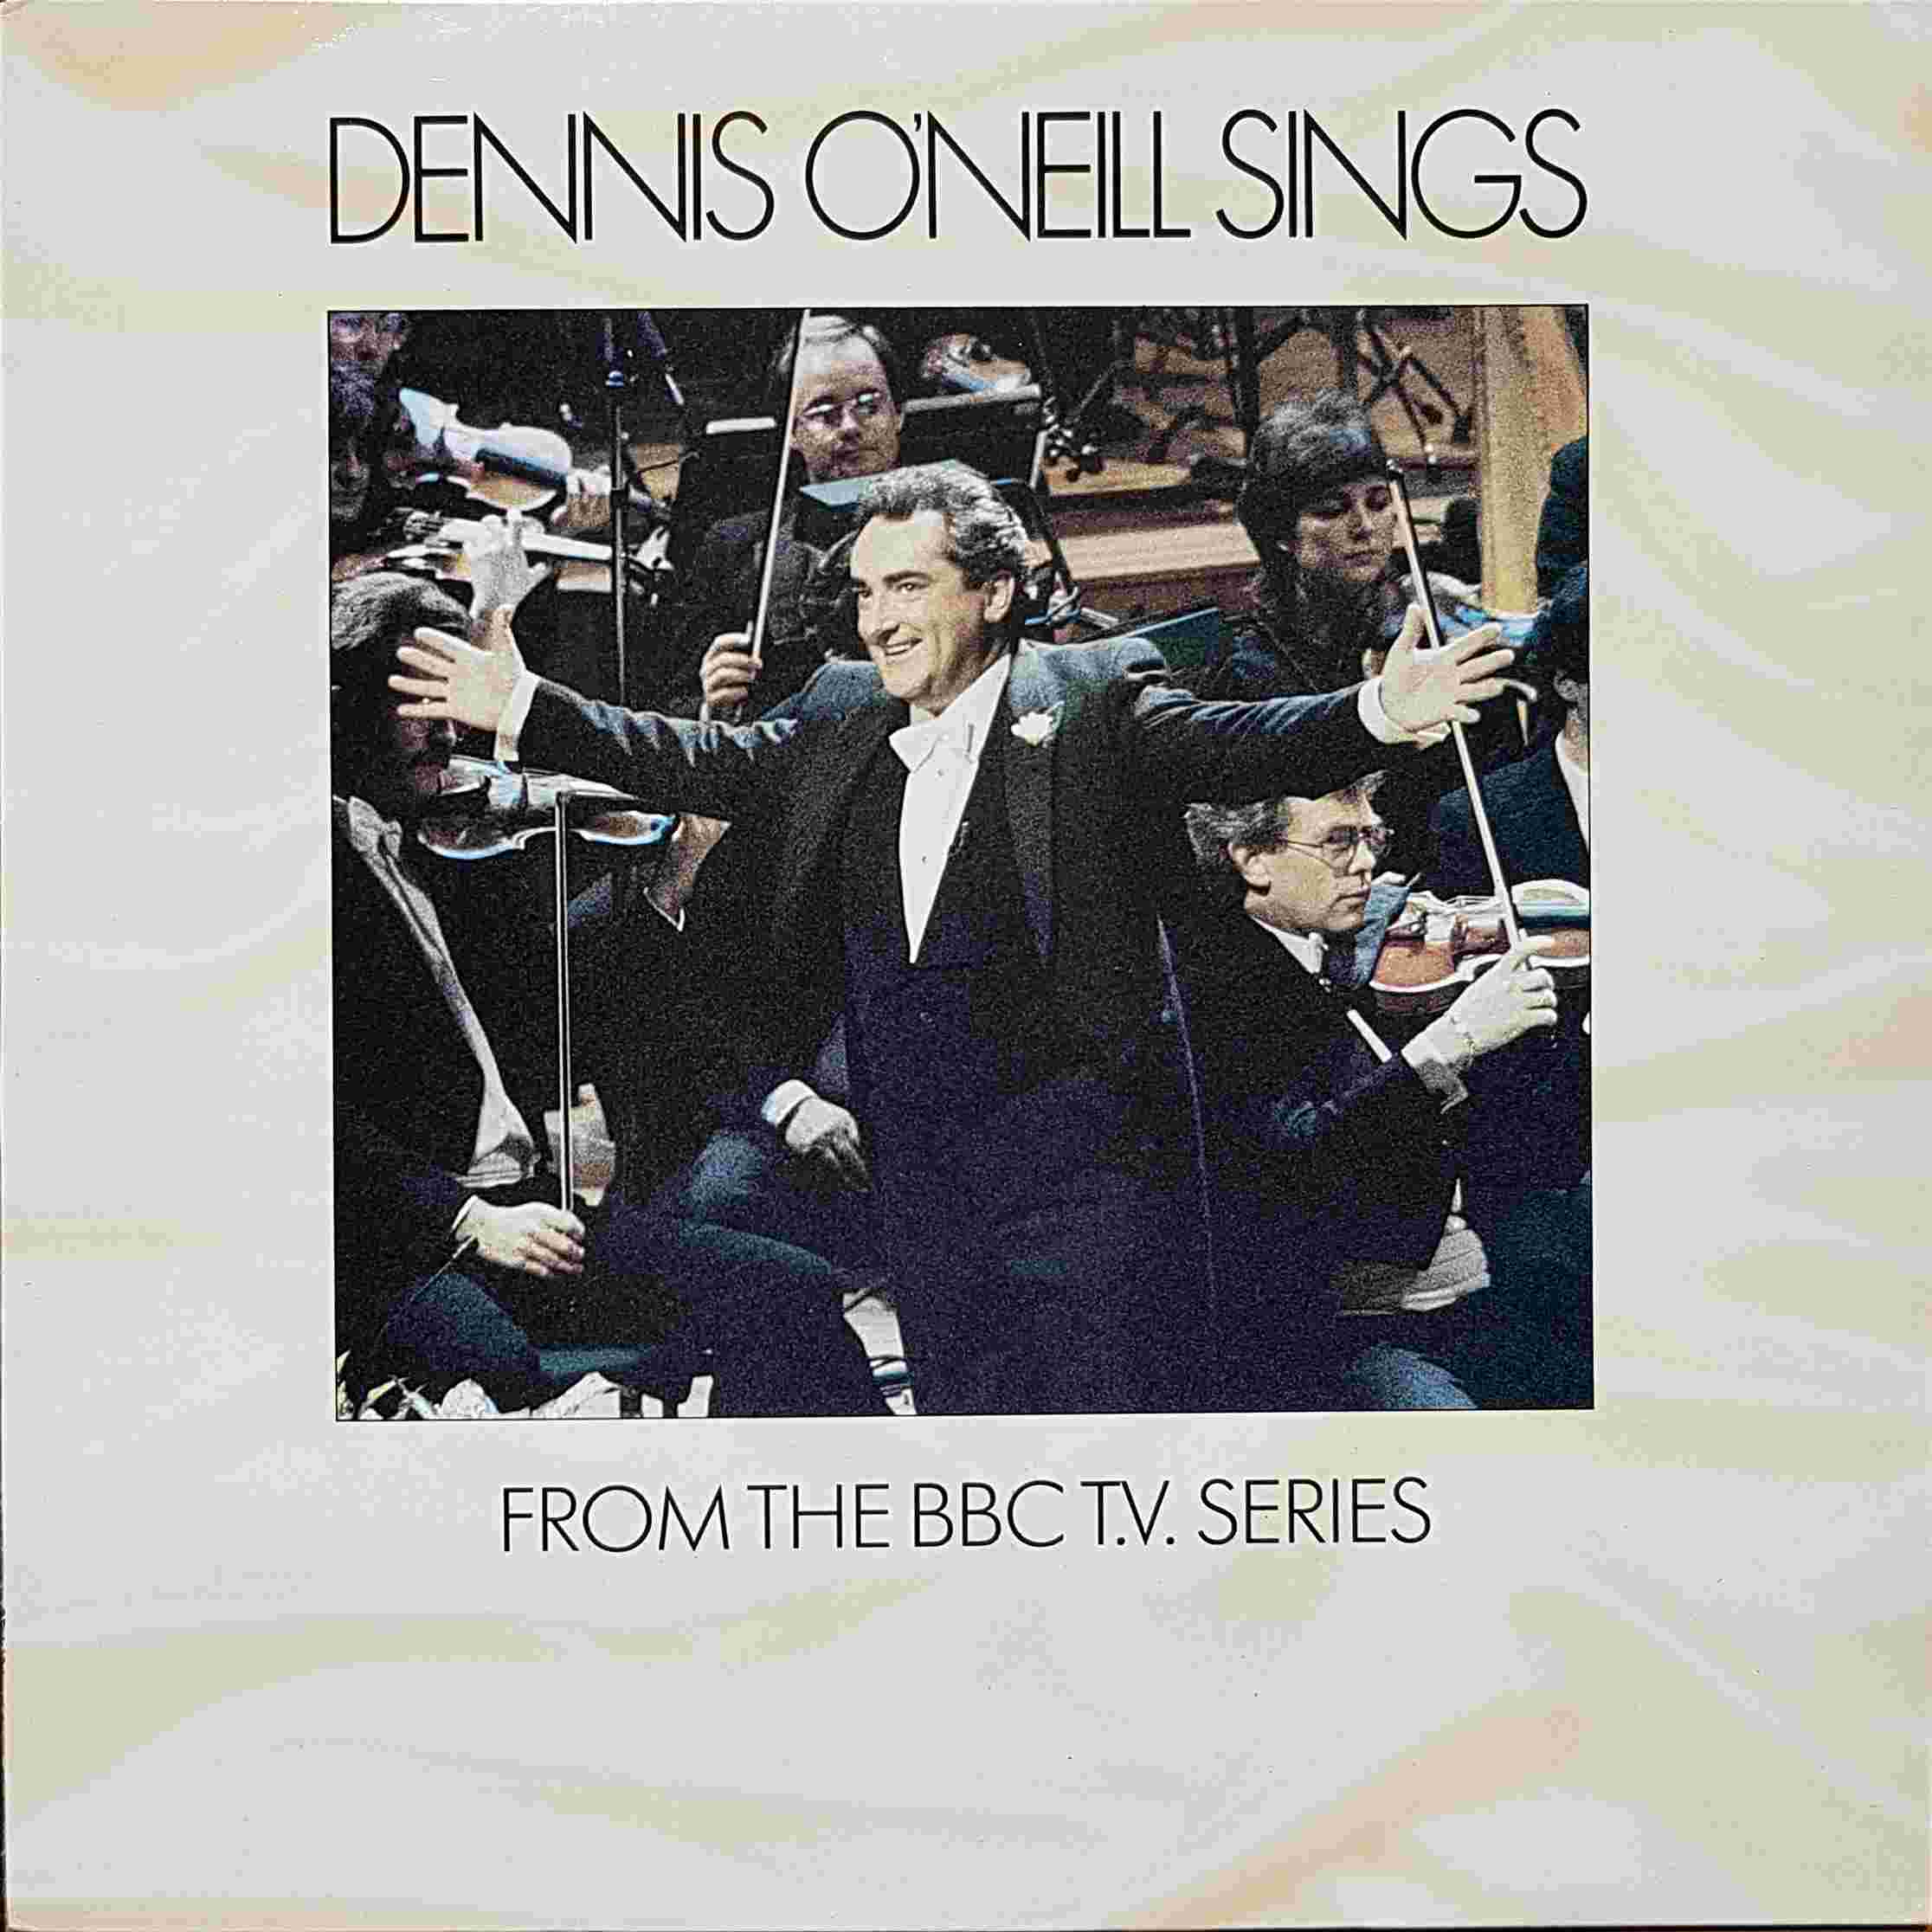 Picture of REN 626 Dennis O'Neill sings by artist Dennis O'Neill  from the BBC albums - Records and Tapes library